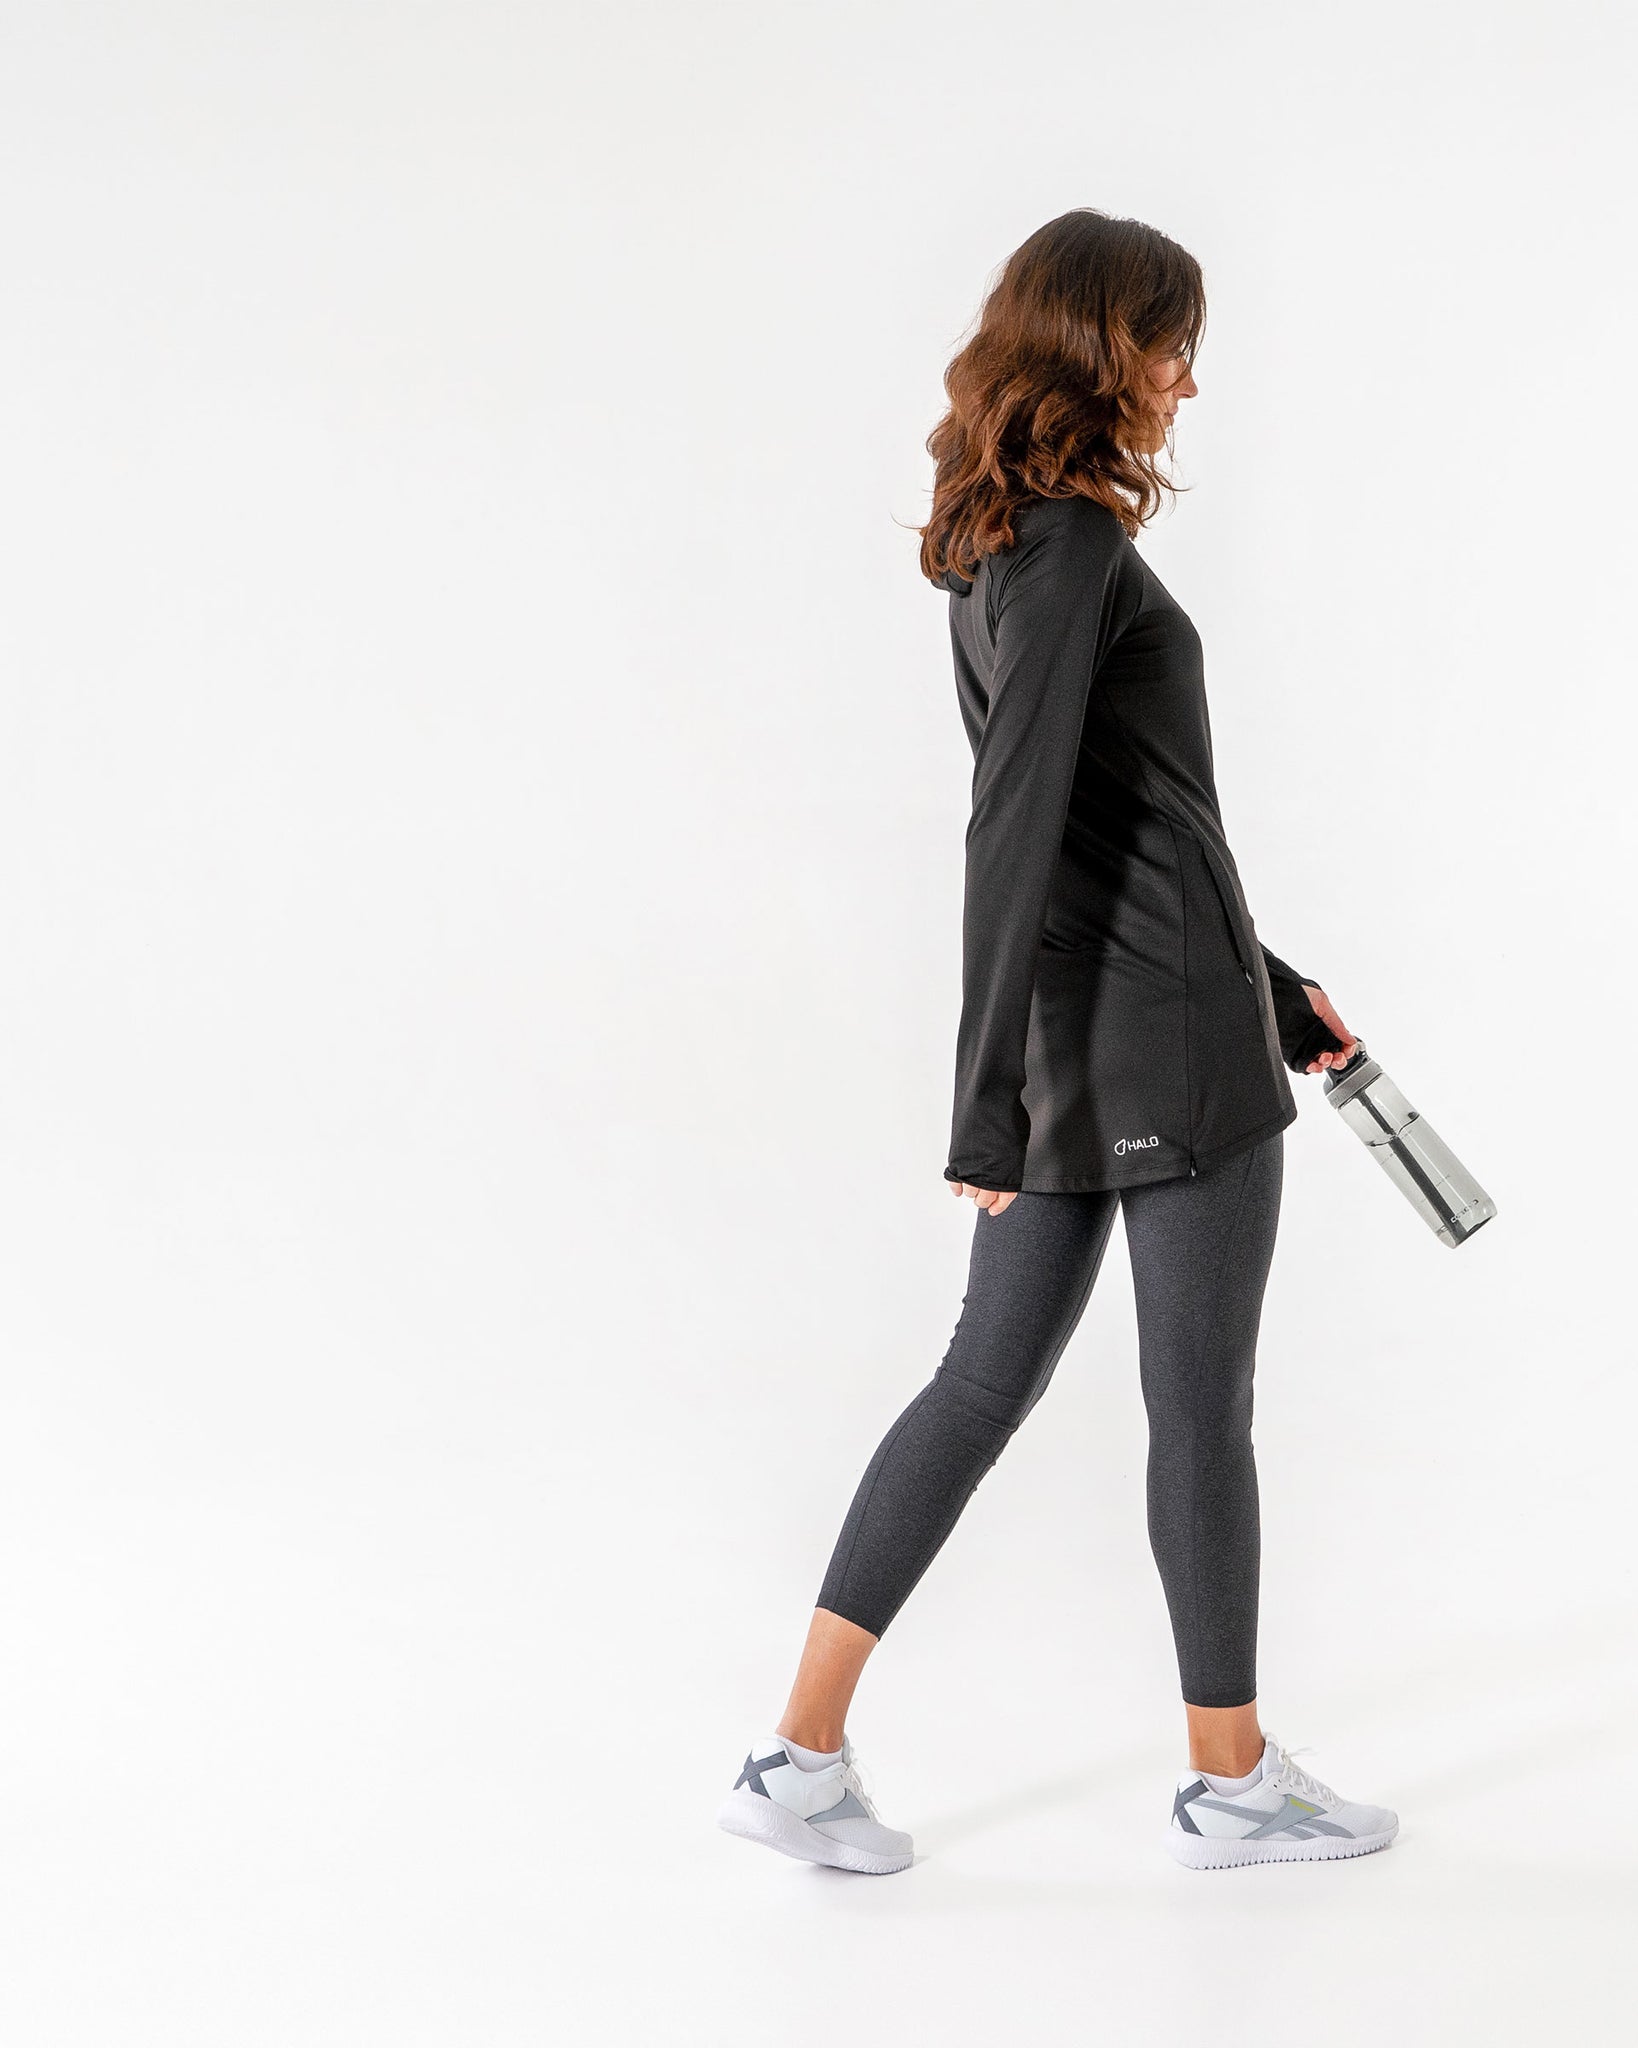 Halo Running Hoodie in black by Veil Garments. Modest activewear collection.